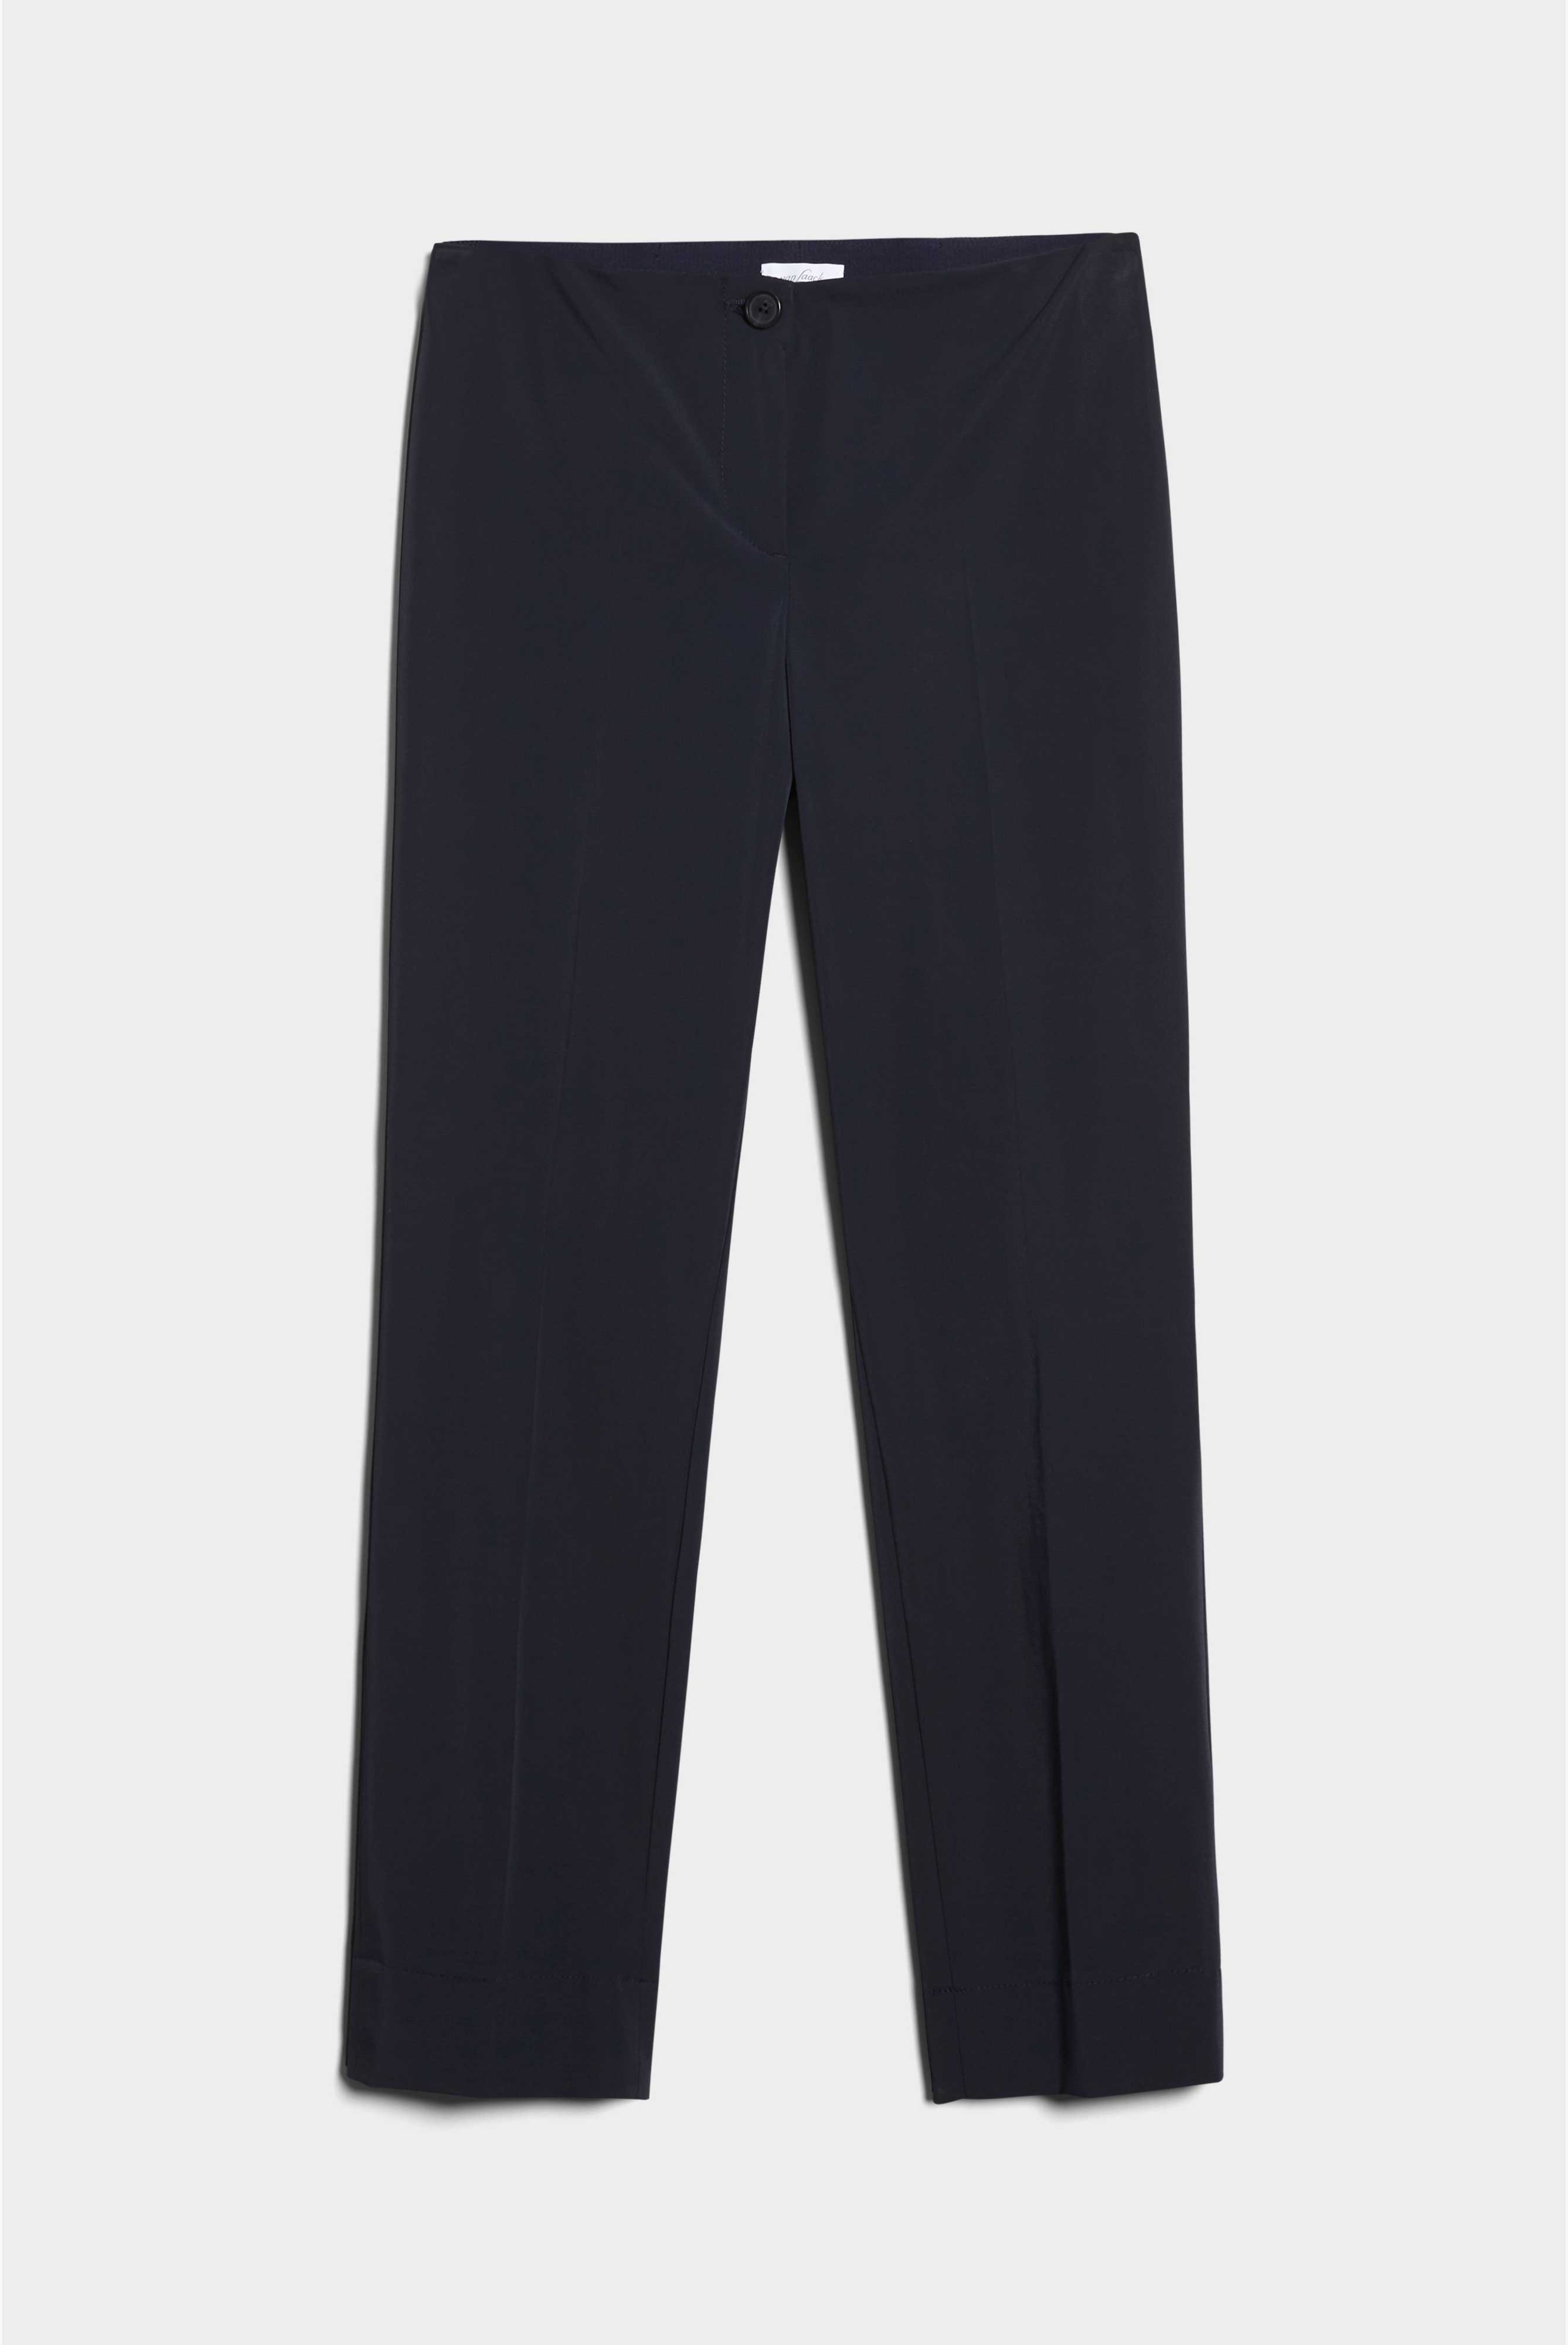 Jeans & Trousers+Business trousers with stretch+04.635K..J00144.790.44